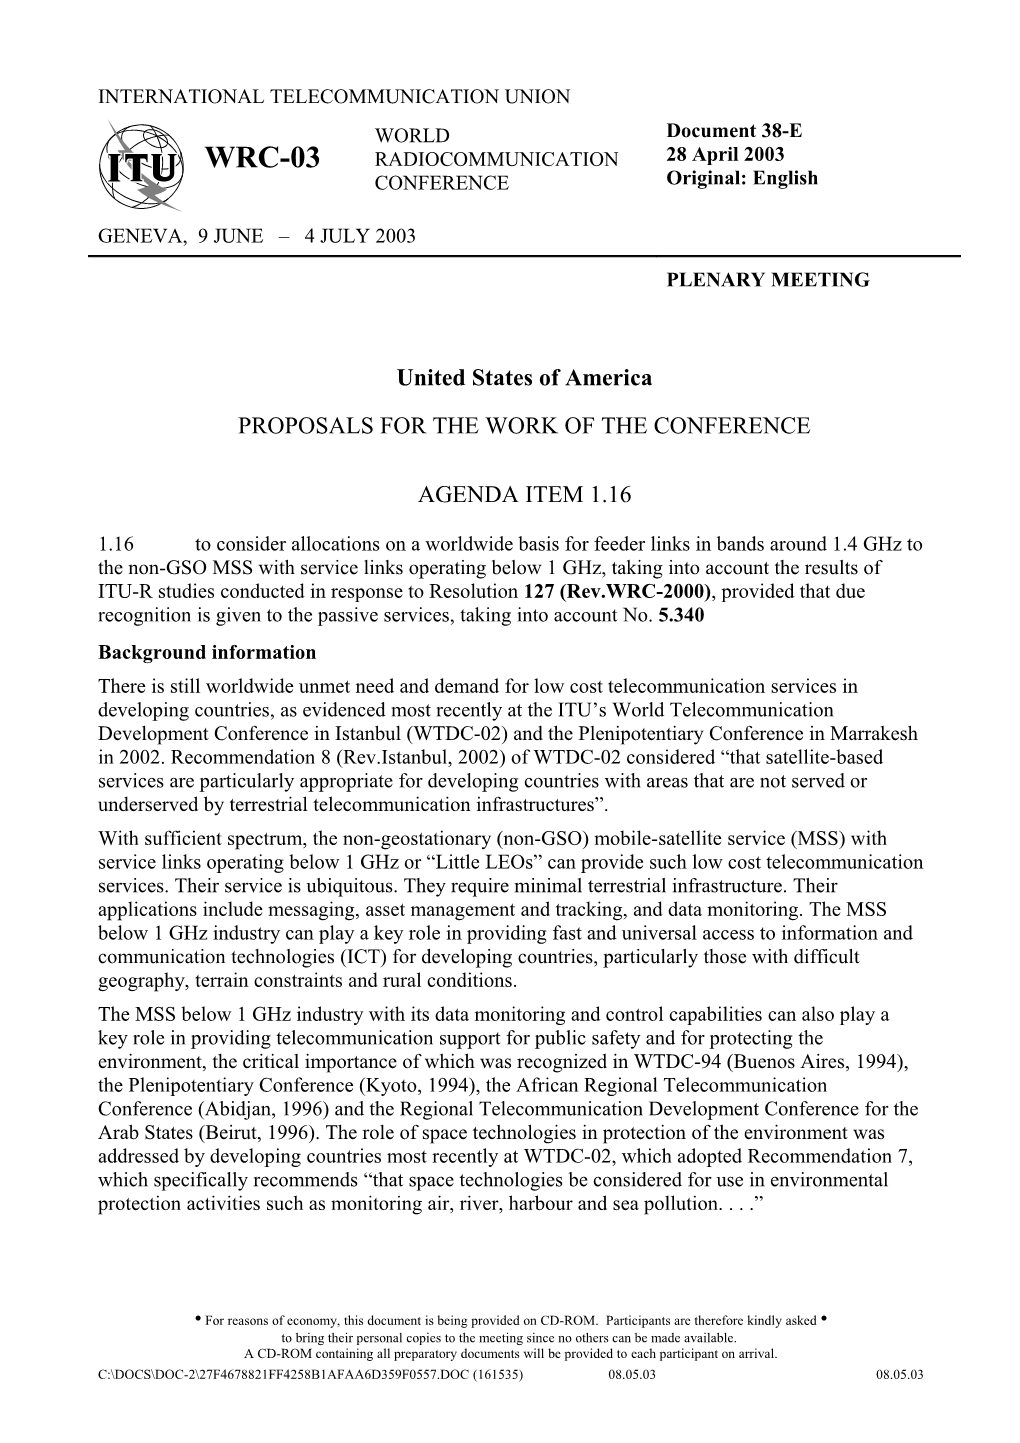 Proposals for the Work of the Conference: Agenda Item 1.16